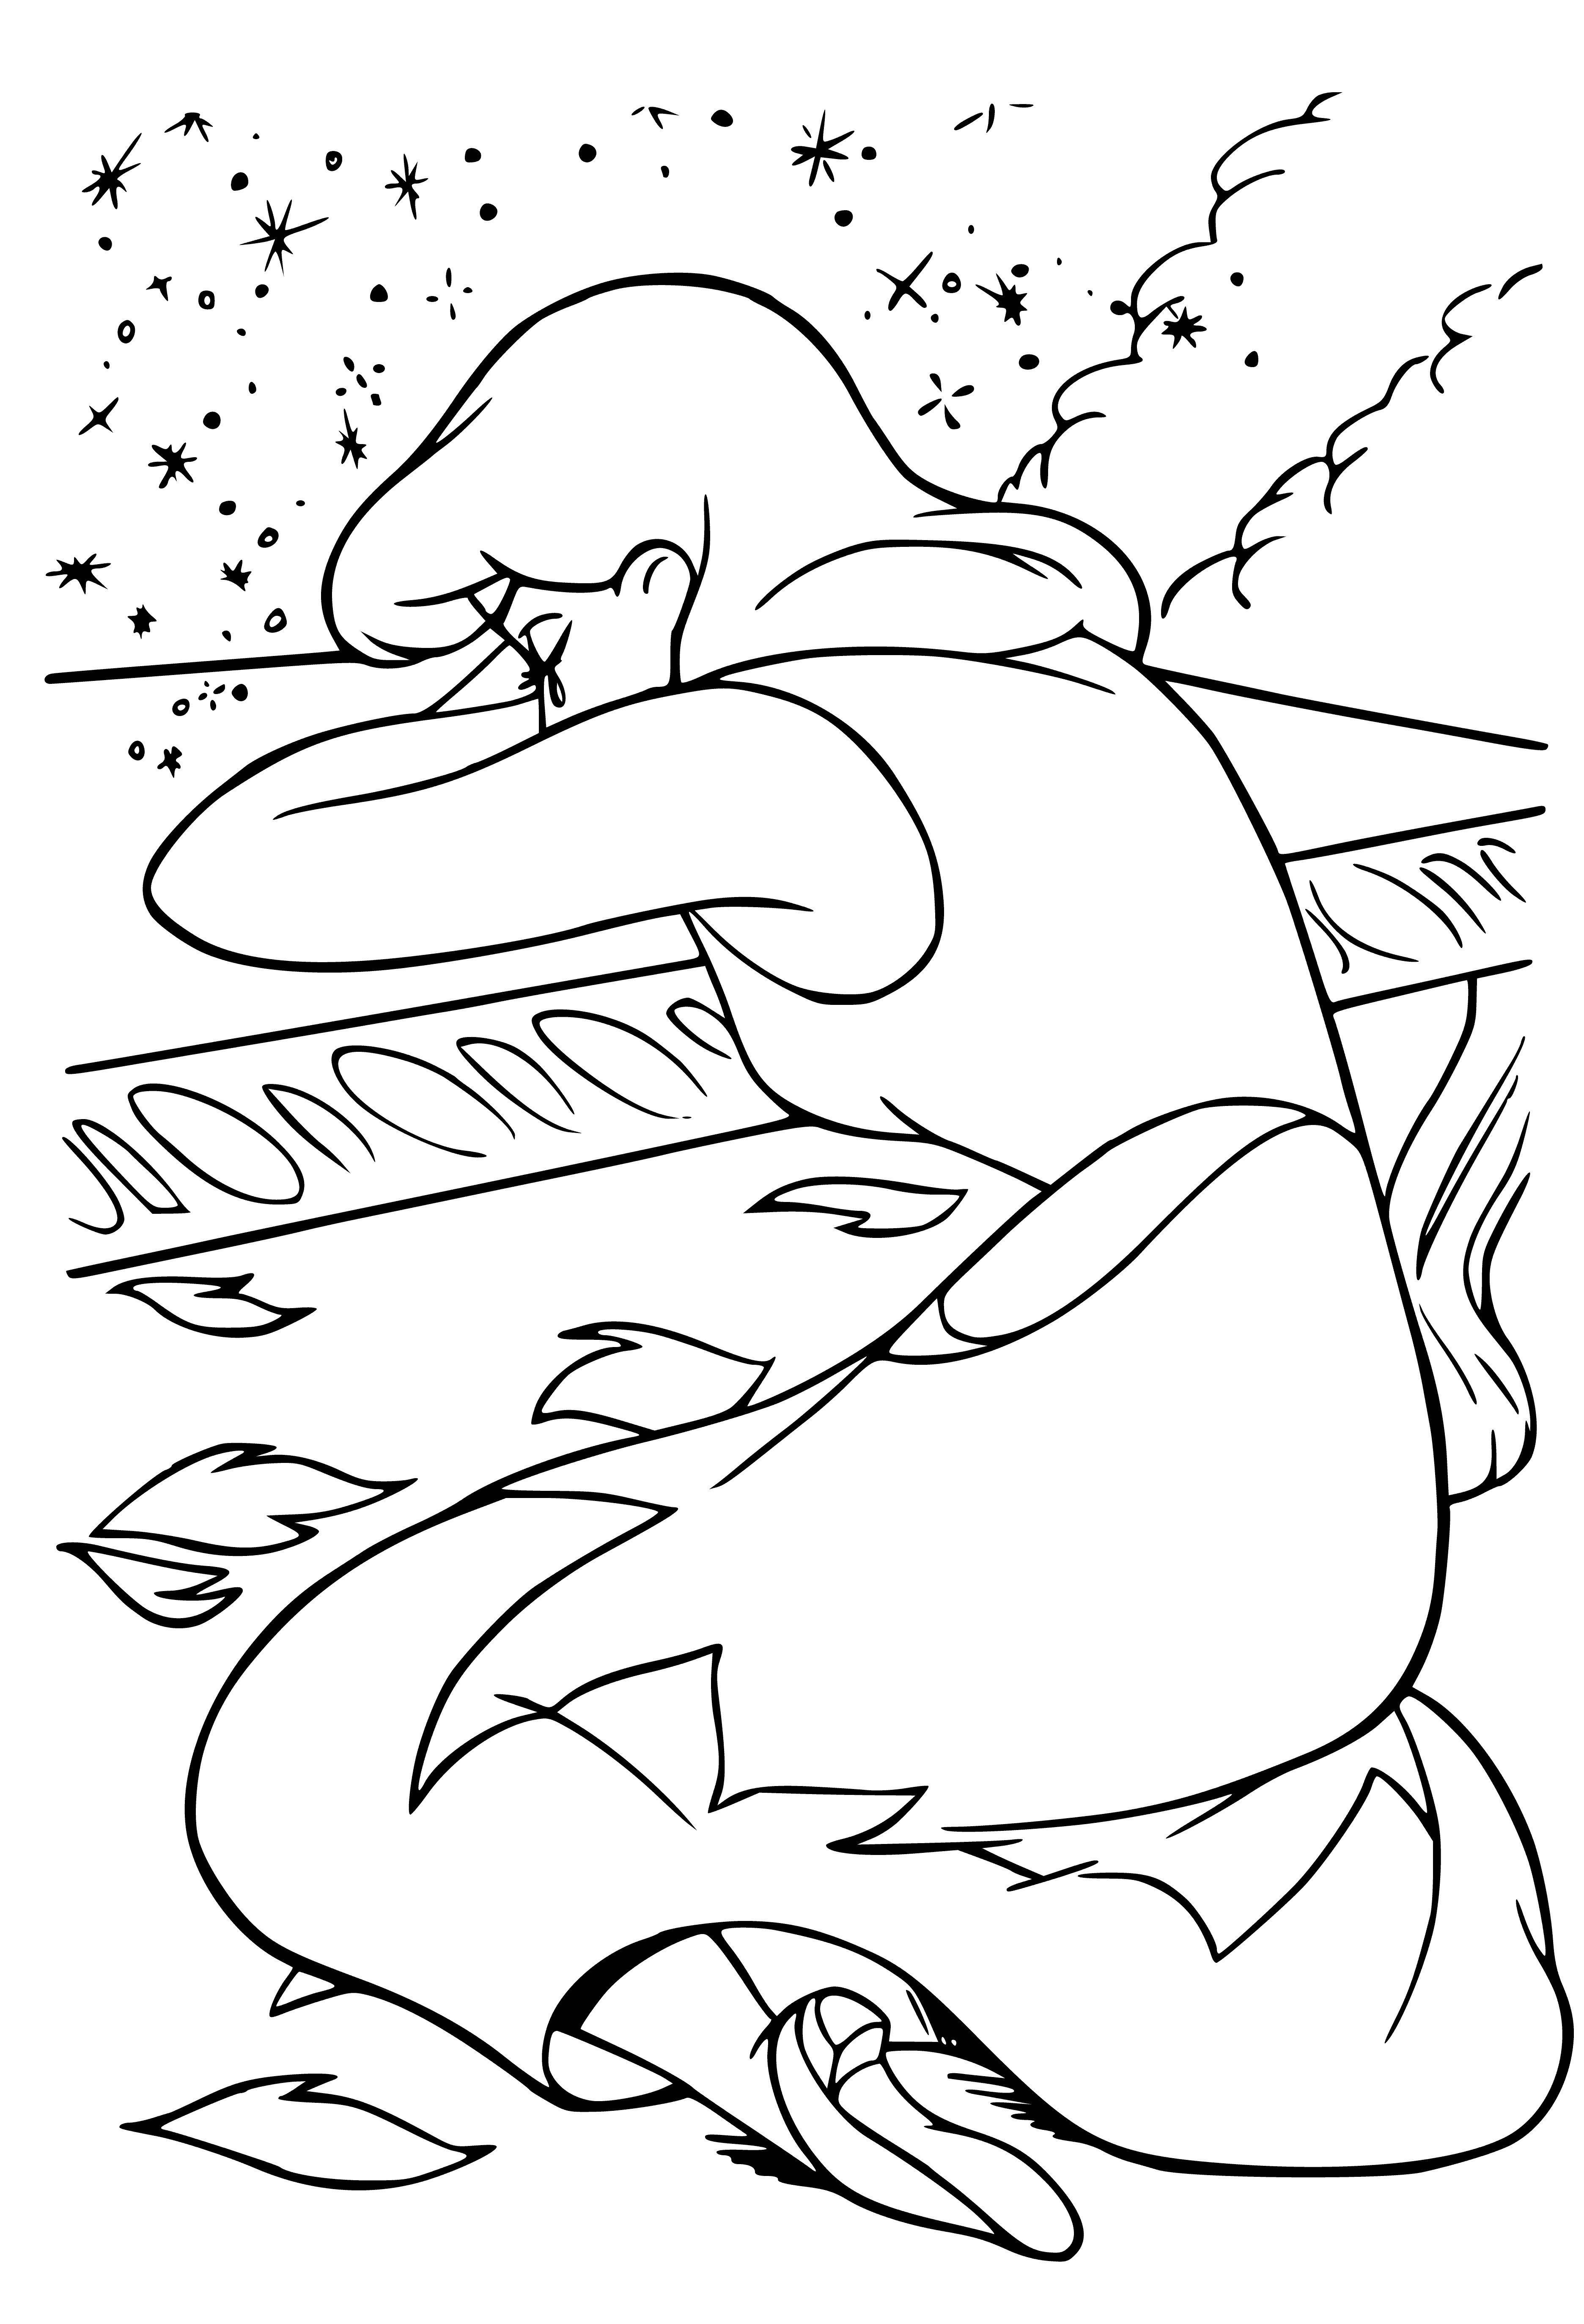 coloring page: Cinderella is sitting sadly, head in hands, tears streaming down her face.